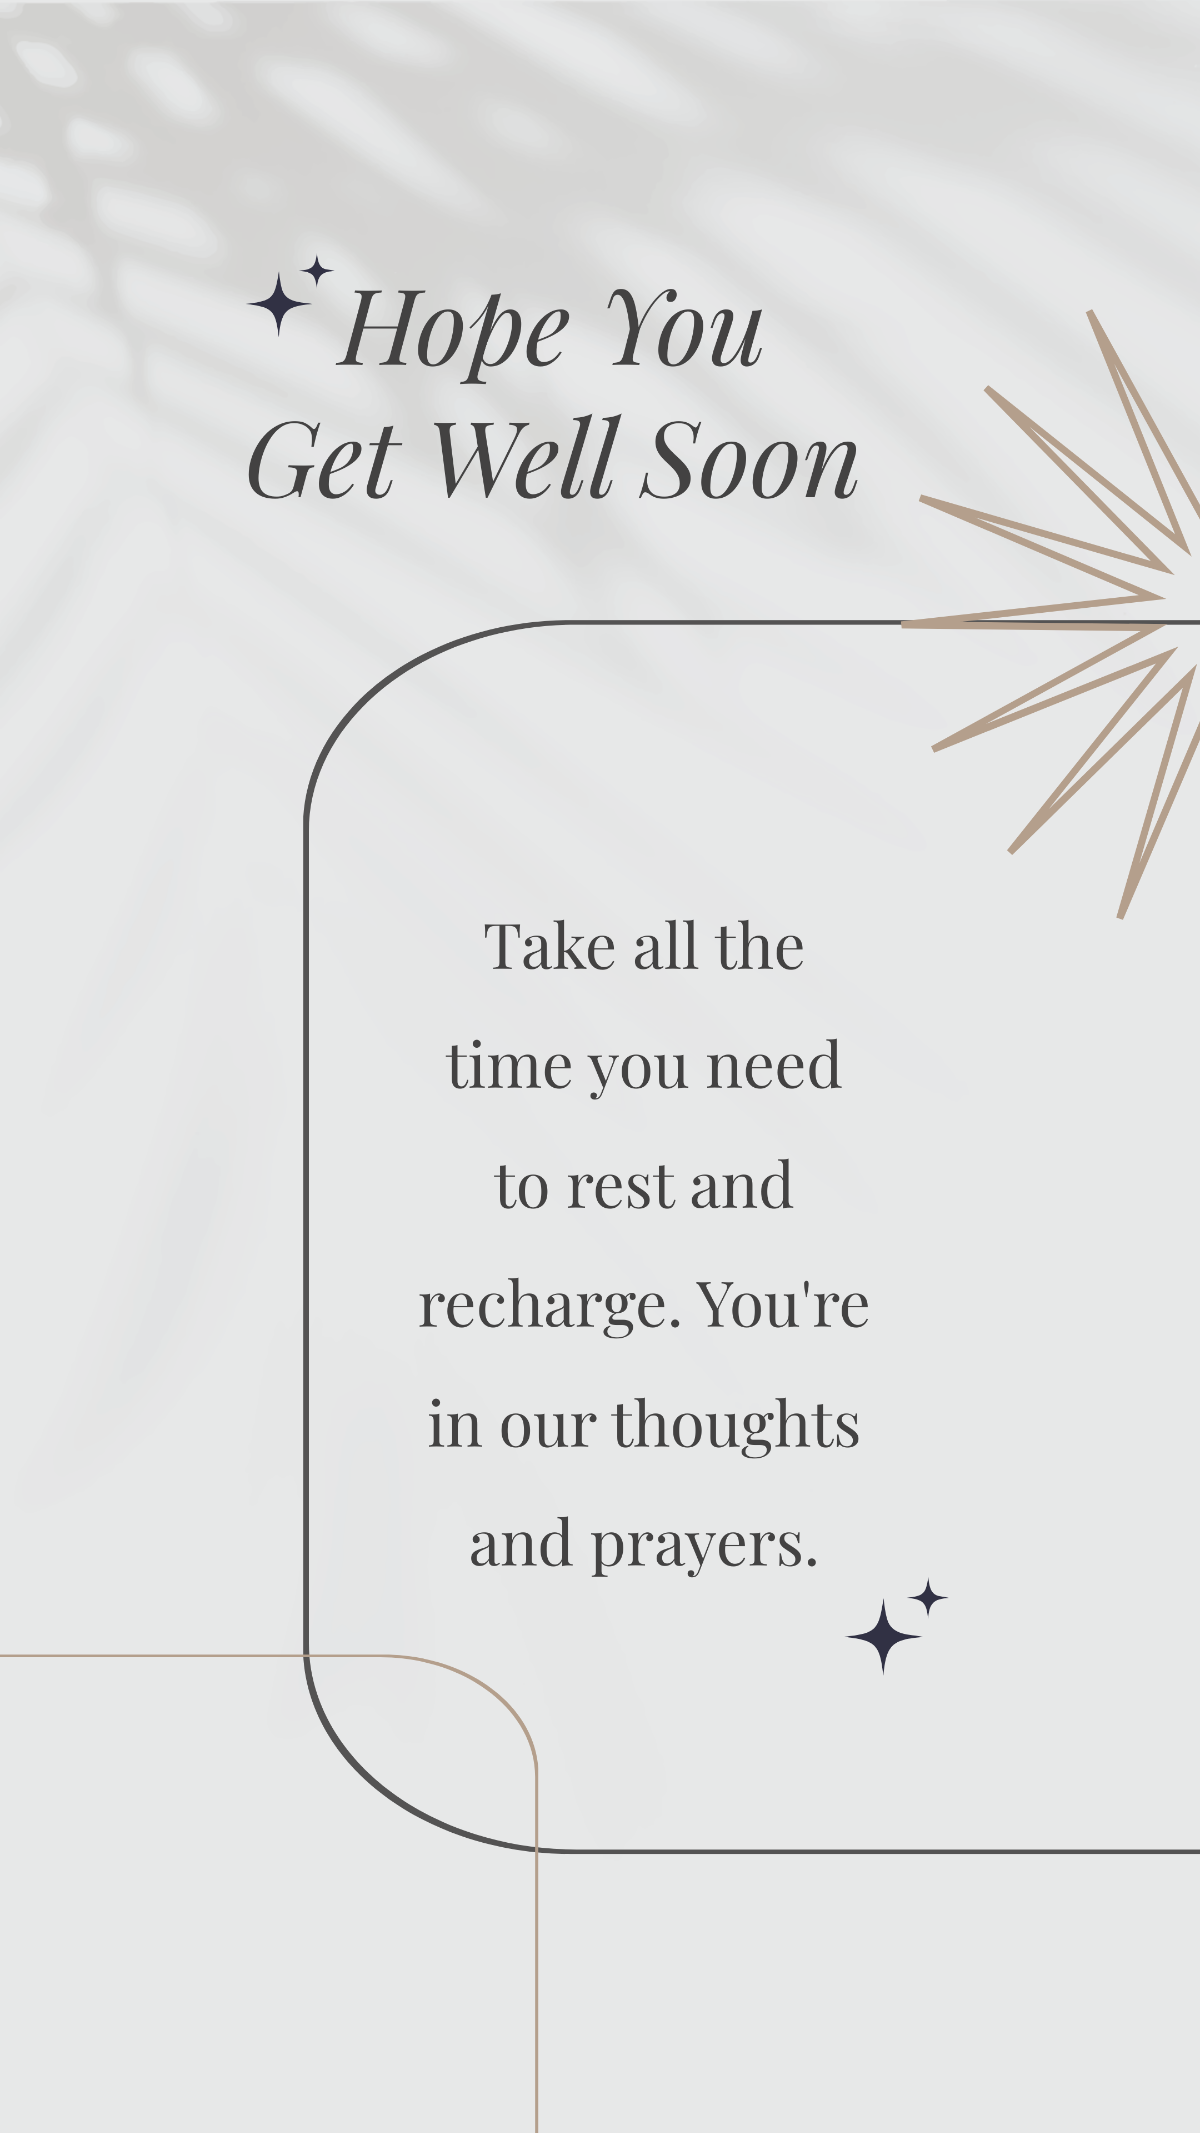 Get Well Soon Greeting Your Story